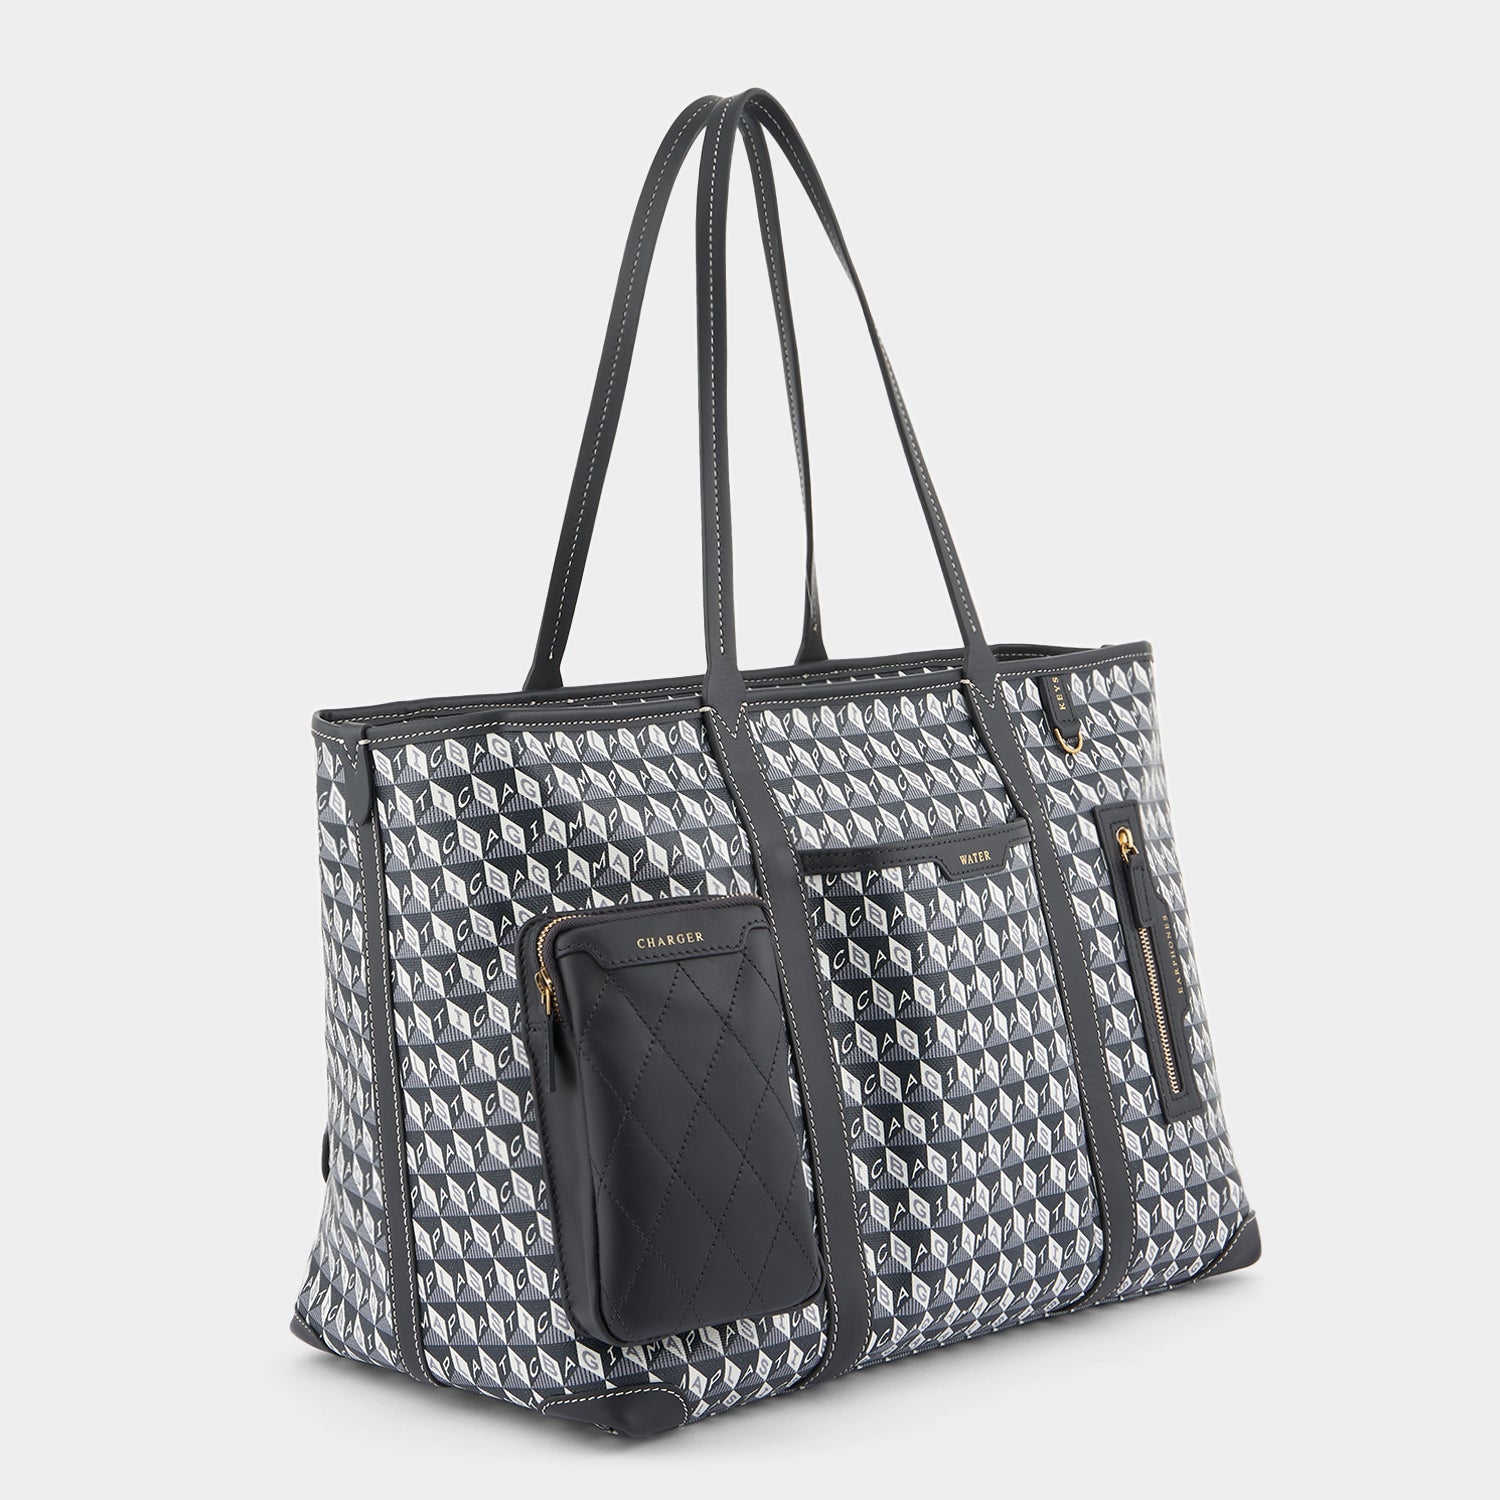 I am a Plastic Bag In-Flight Tote -

                  
                    Recycled Canvas in Charcoal -
                  

                  Anya Hindmarch UK
